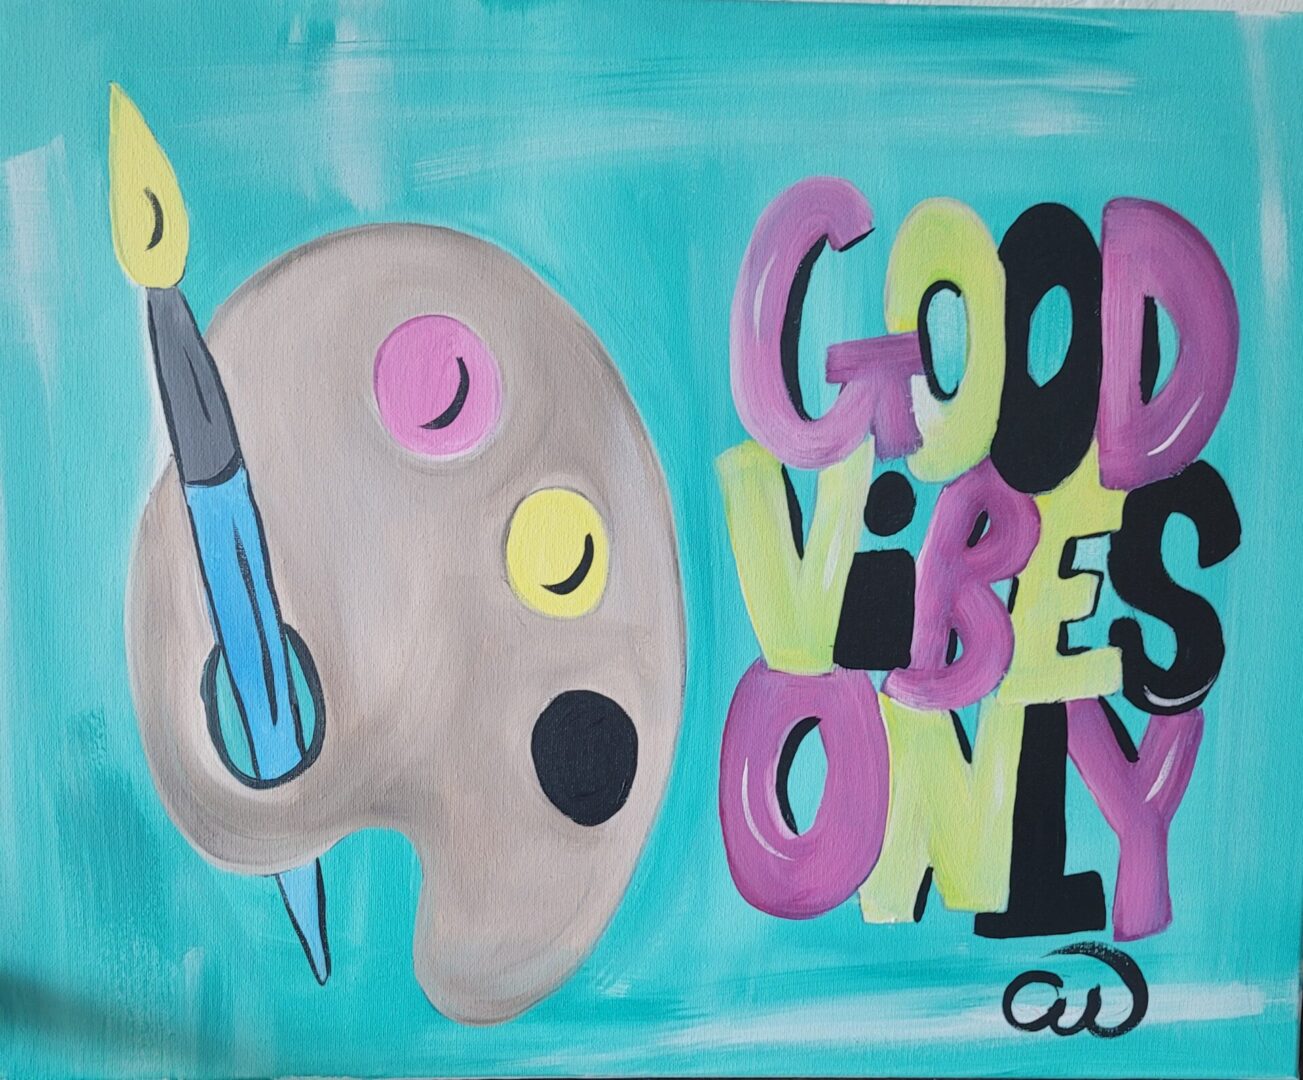 A painting of an artist 's palette and brush with the words " good vibes only ".